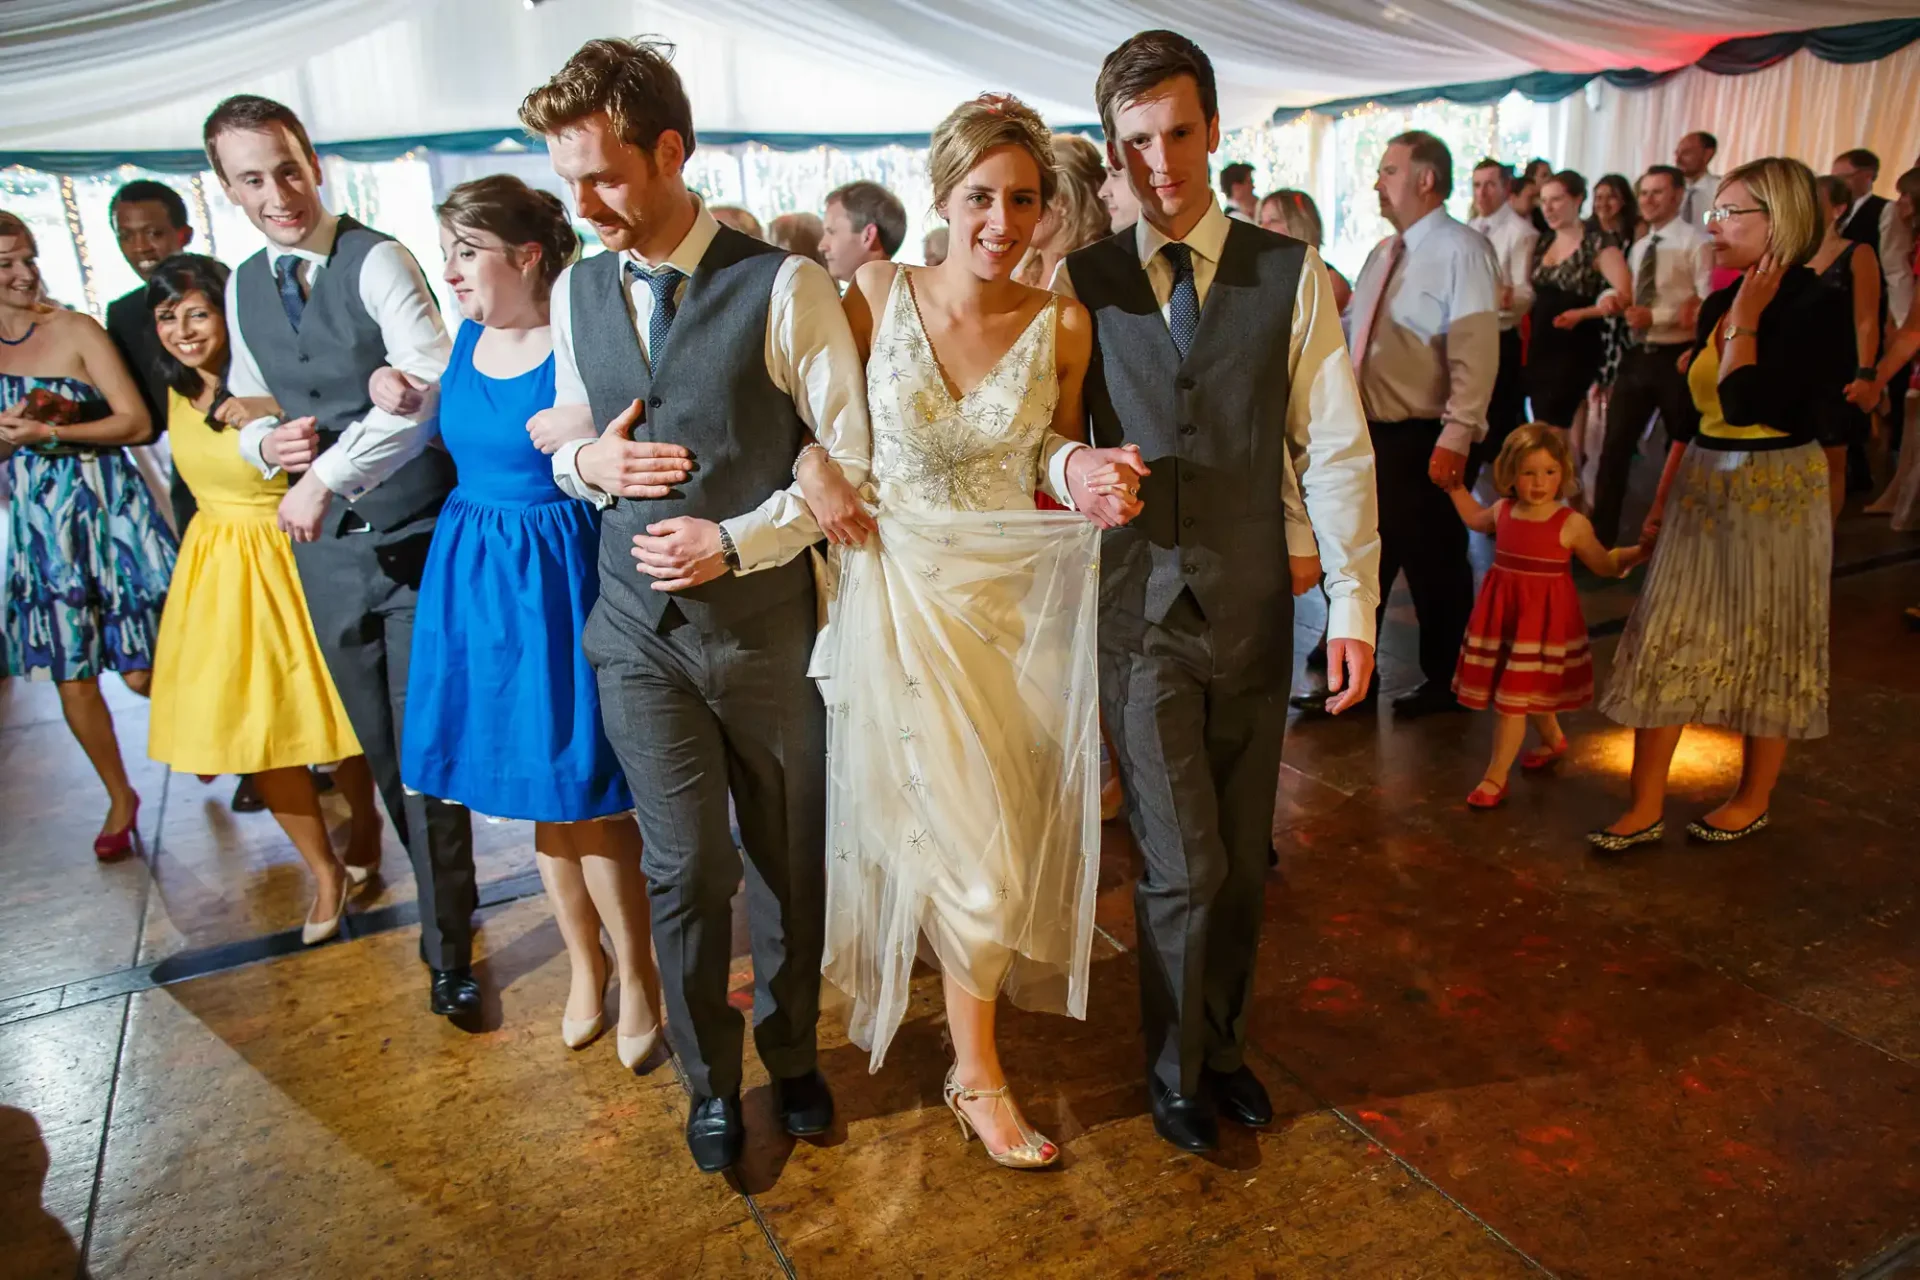 A bride and groom walk arm-in-arm flanked by friends in a festive wedding reception, with guests dancing around them.